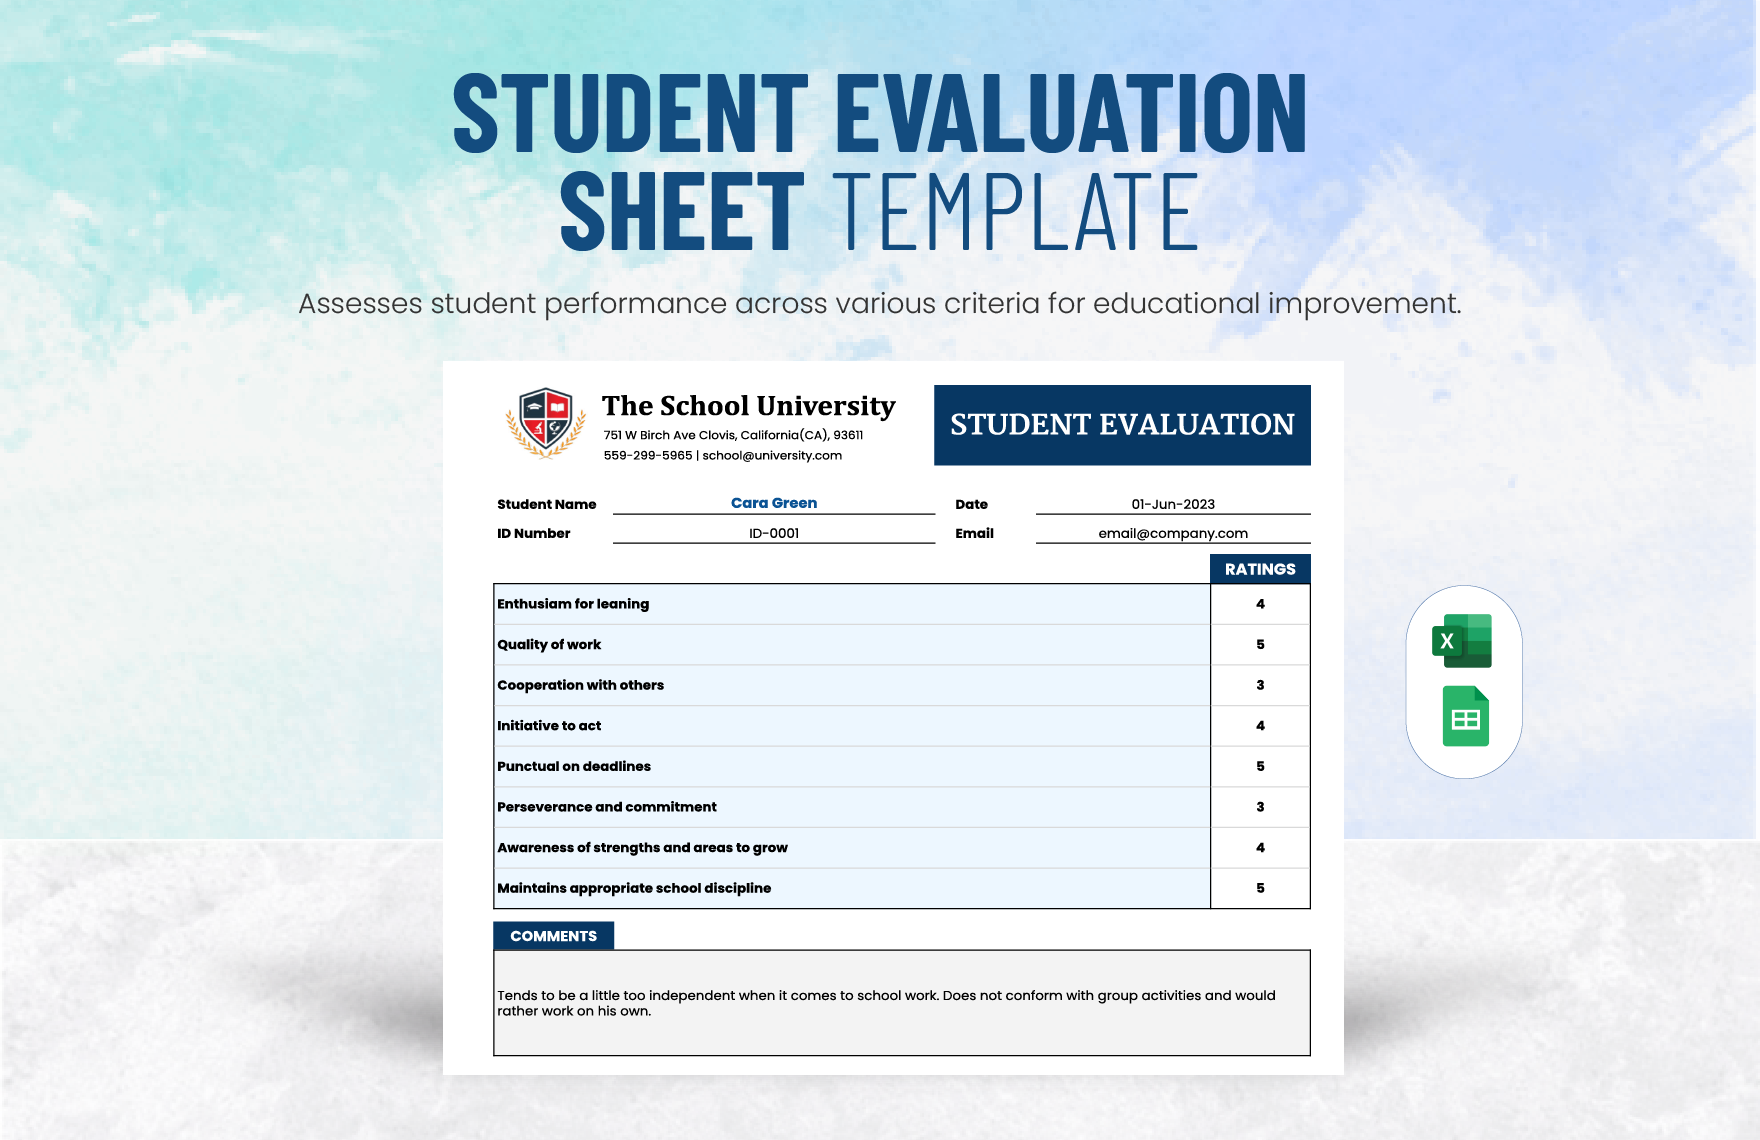 Student Evaluation Sheet Template in Excel, Google Sheets